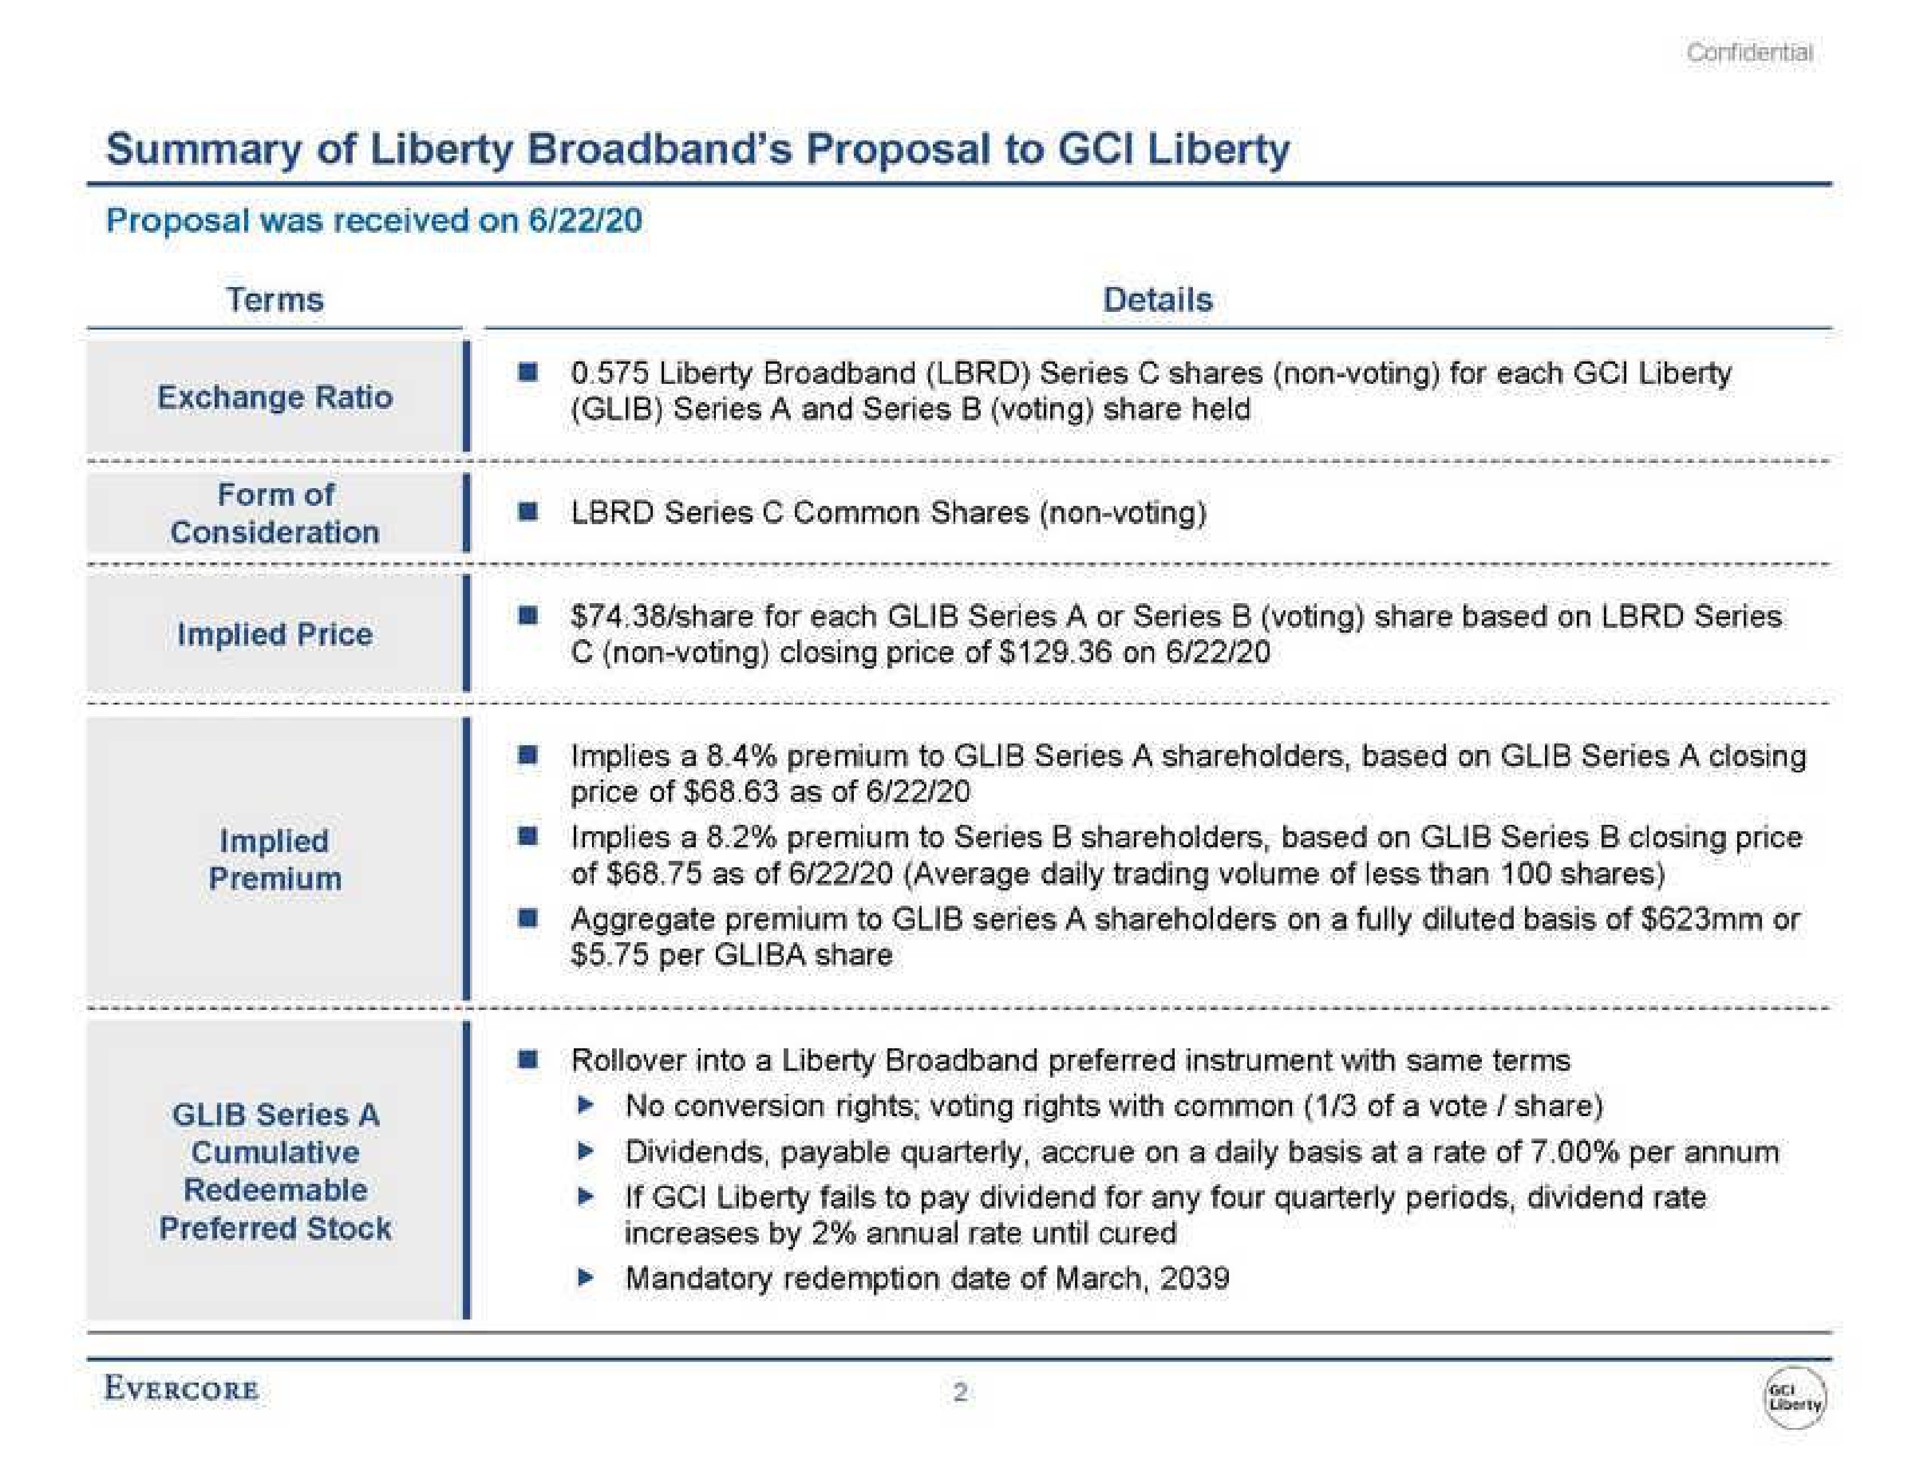 summary of liberty proposal to liberty dividends payable quarterly accrue on a daily basis at a rate of per | Evercore